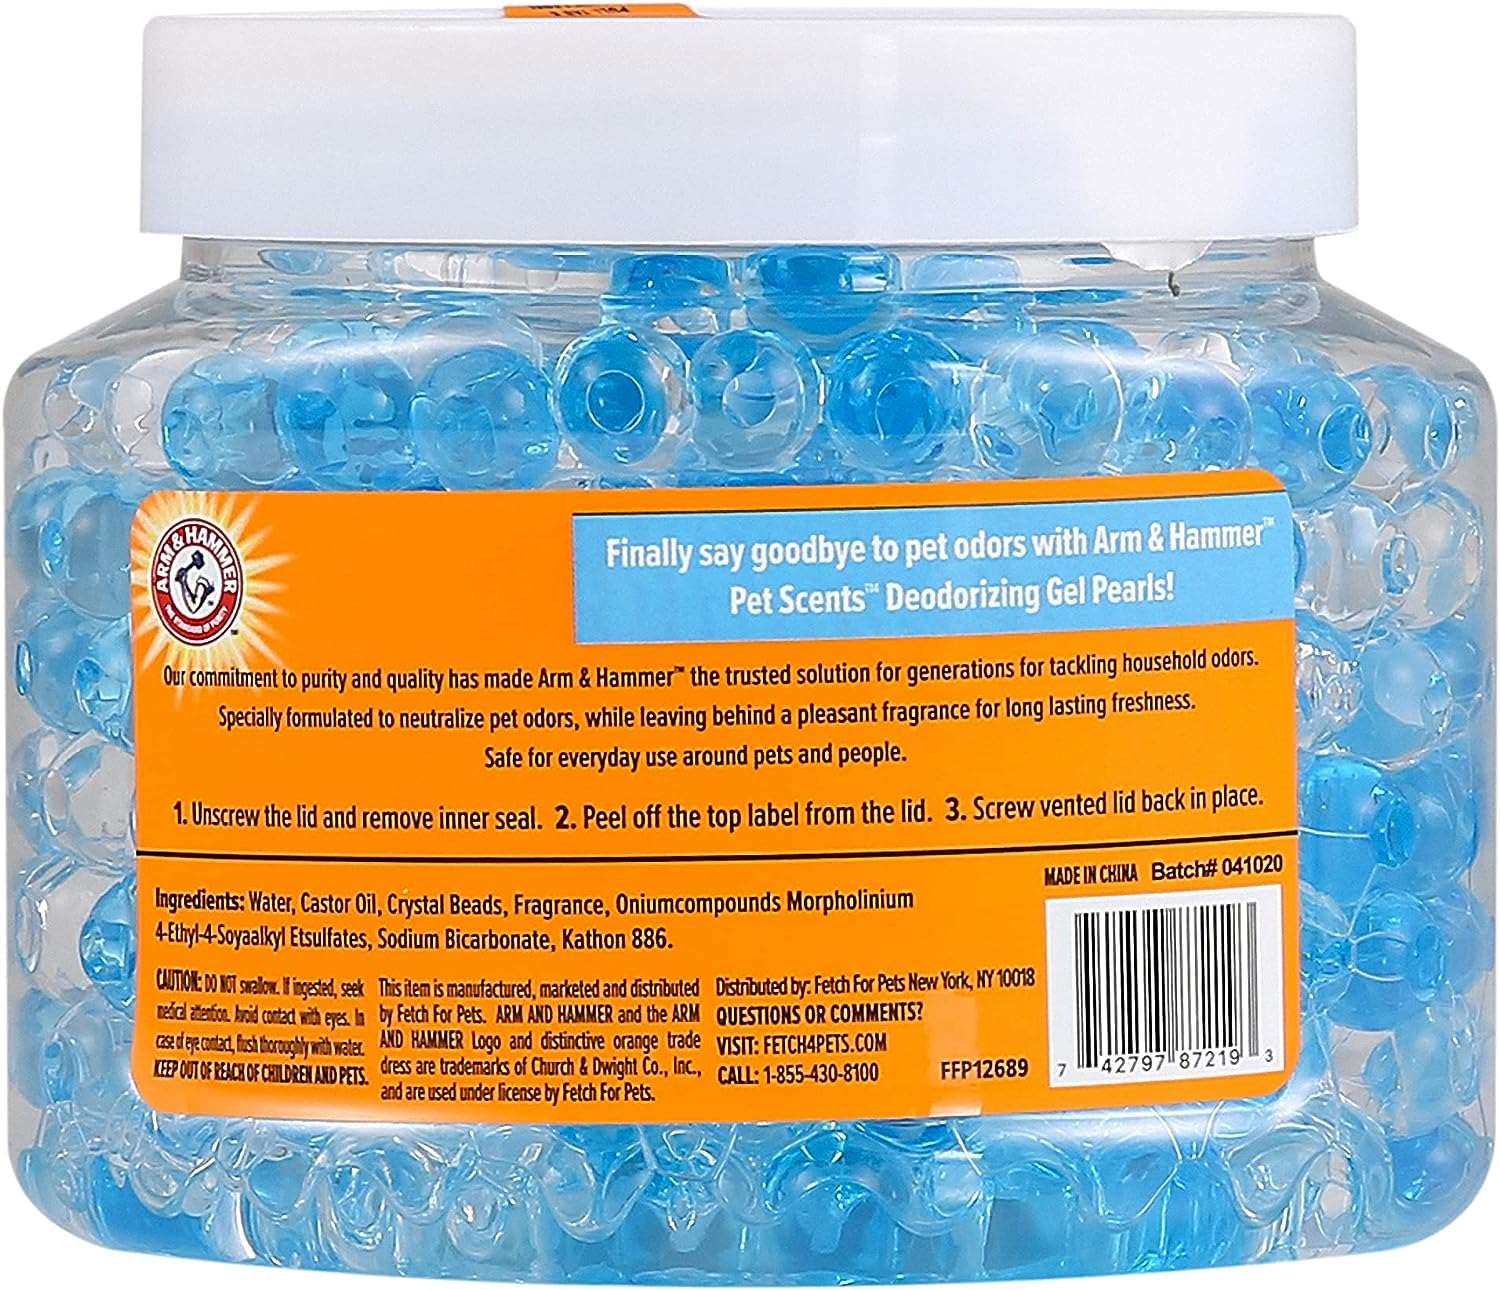 Wholesale prices with free shipping all over United States Arm & Hammer Air Care Pet Scents Deodorizing Gel Beads in Lavender Fields | 12 oz Pet Odor Neutralizing Gel Beads with Baking Soda | Air Freshener Beads for Pet Odor Elimination - Steven Deals